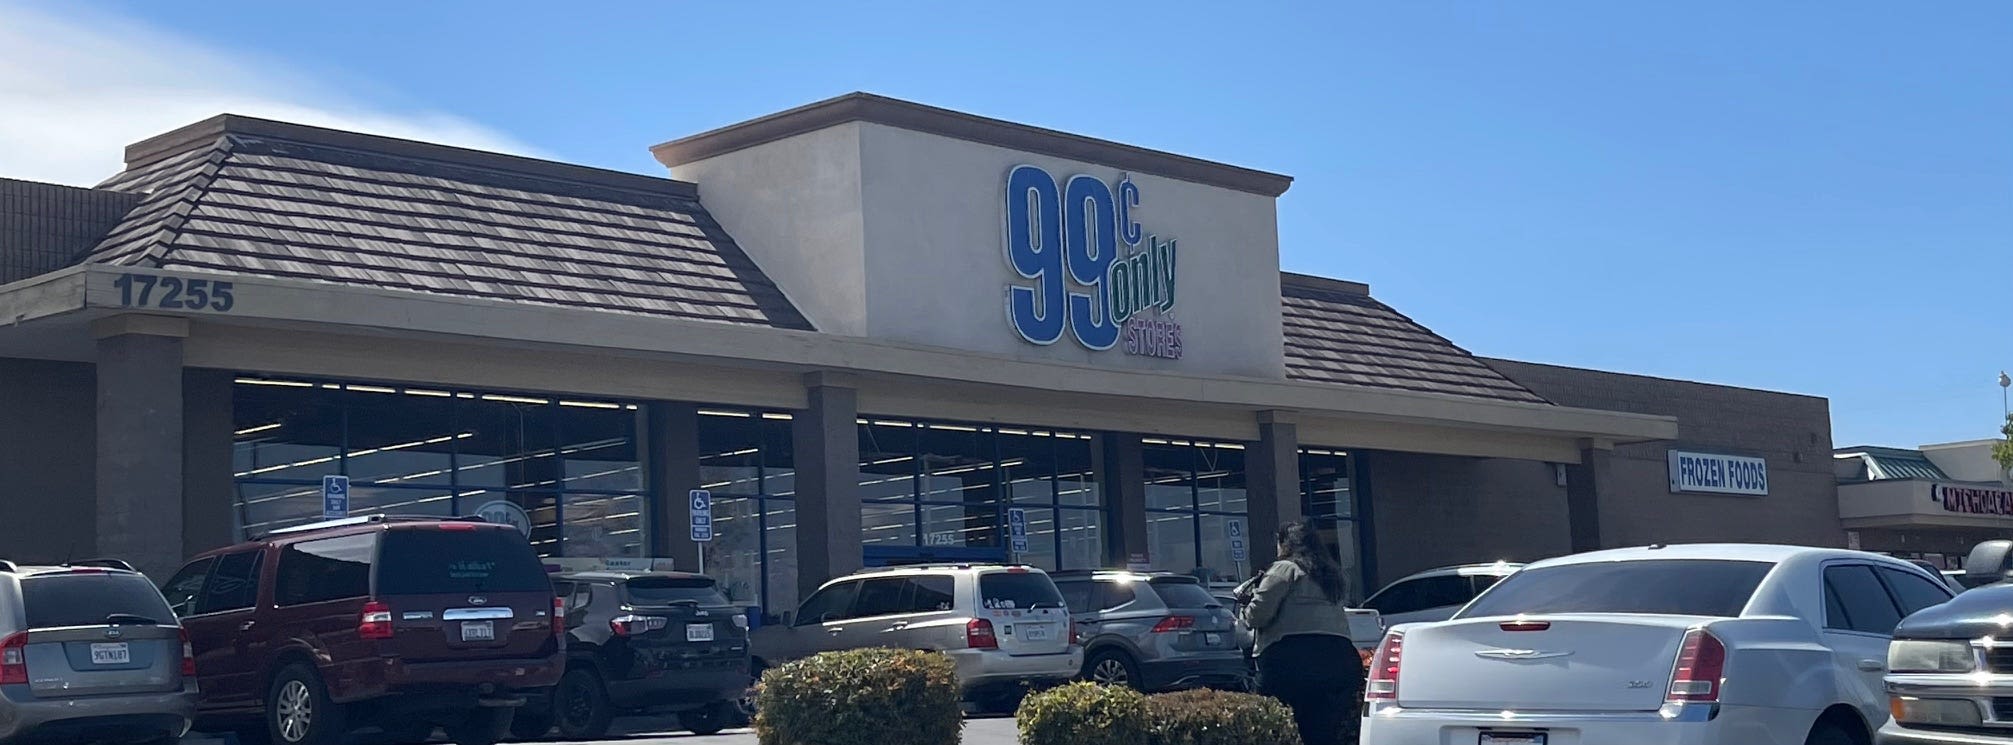 Dollar Tree acquires shuttered 99 Cents Only Stores